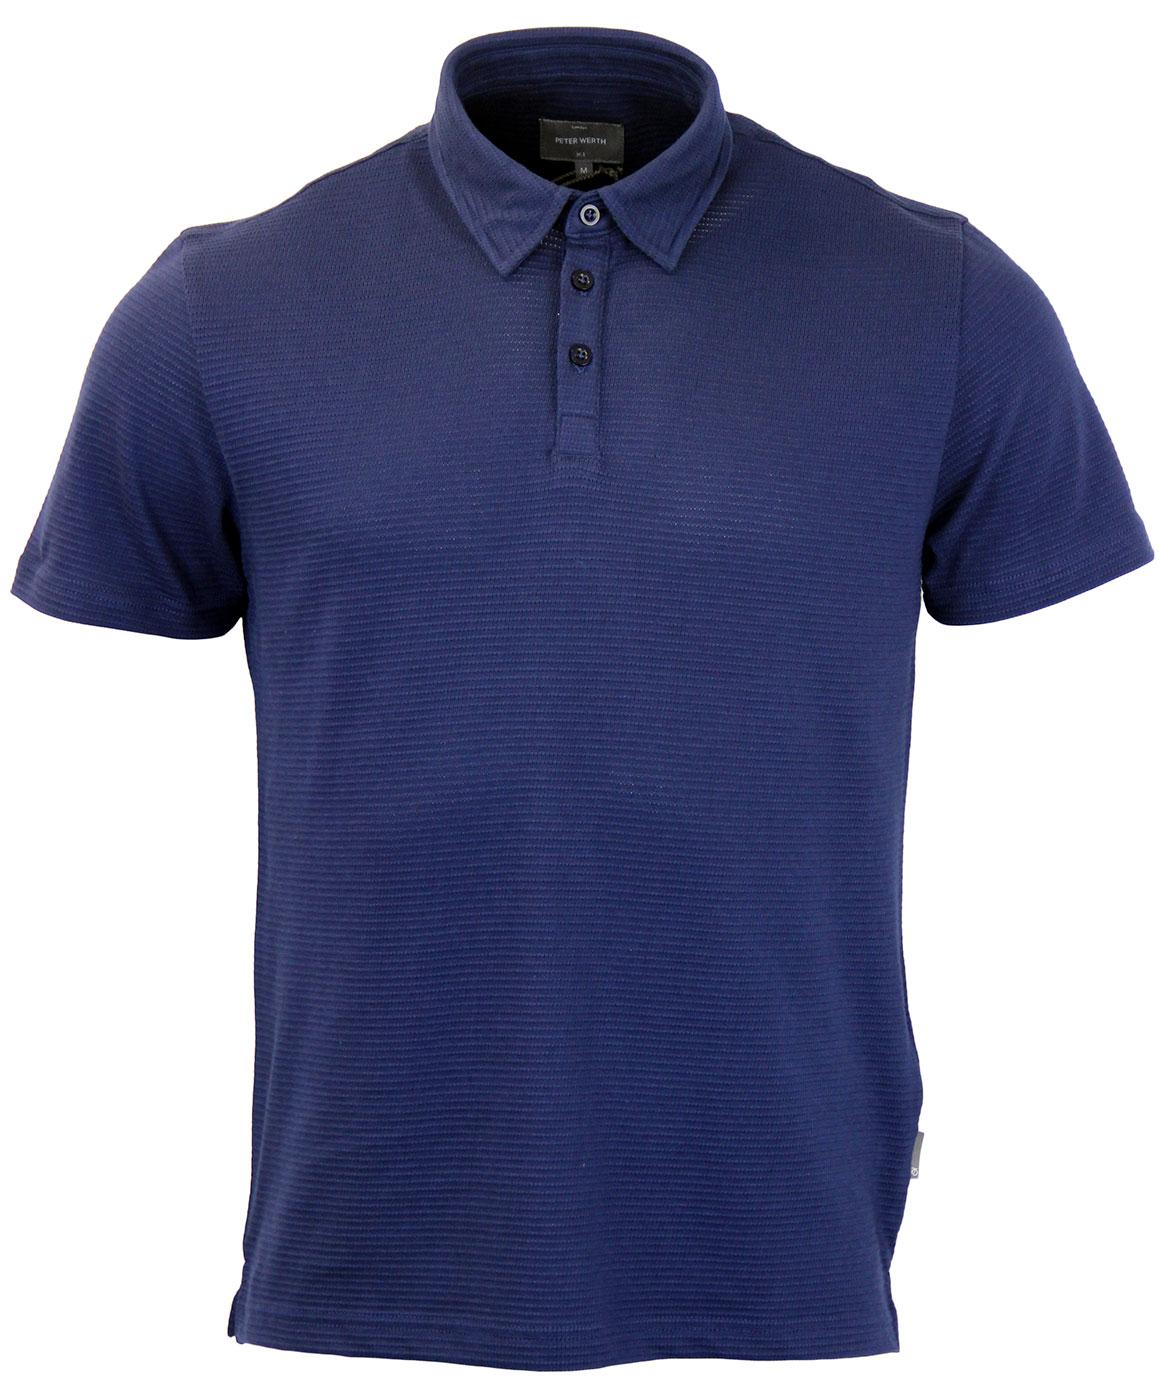 Lombard PETER WERTH Textured Perf Retro Mod Polo N